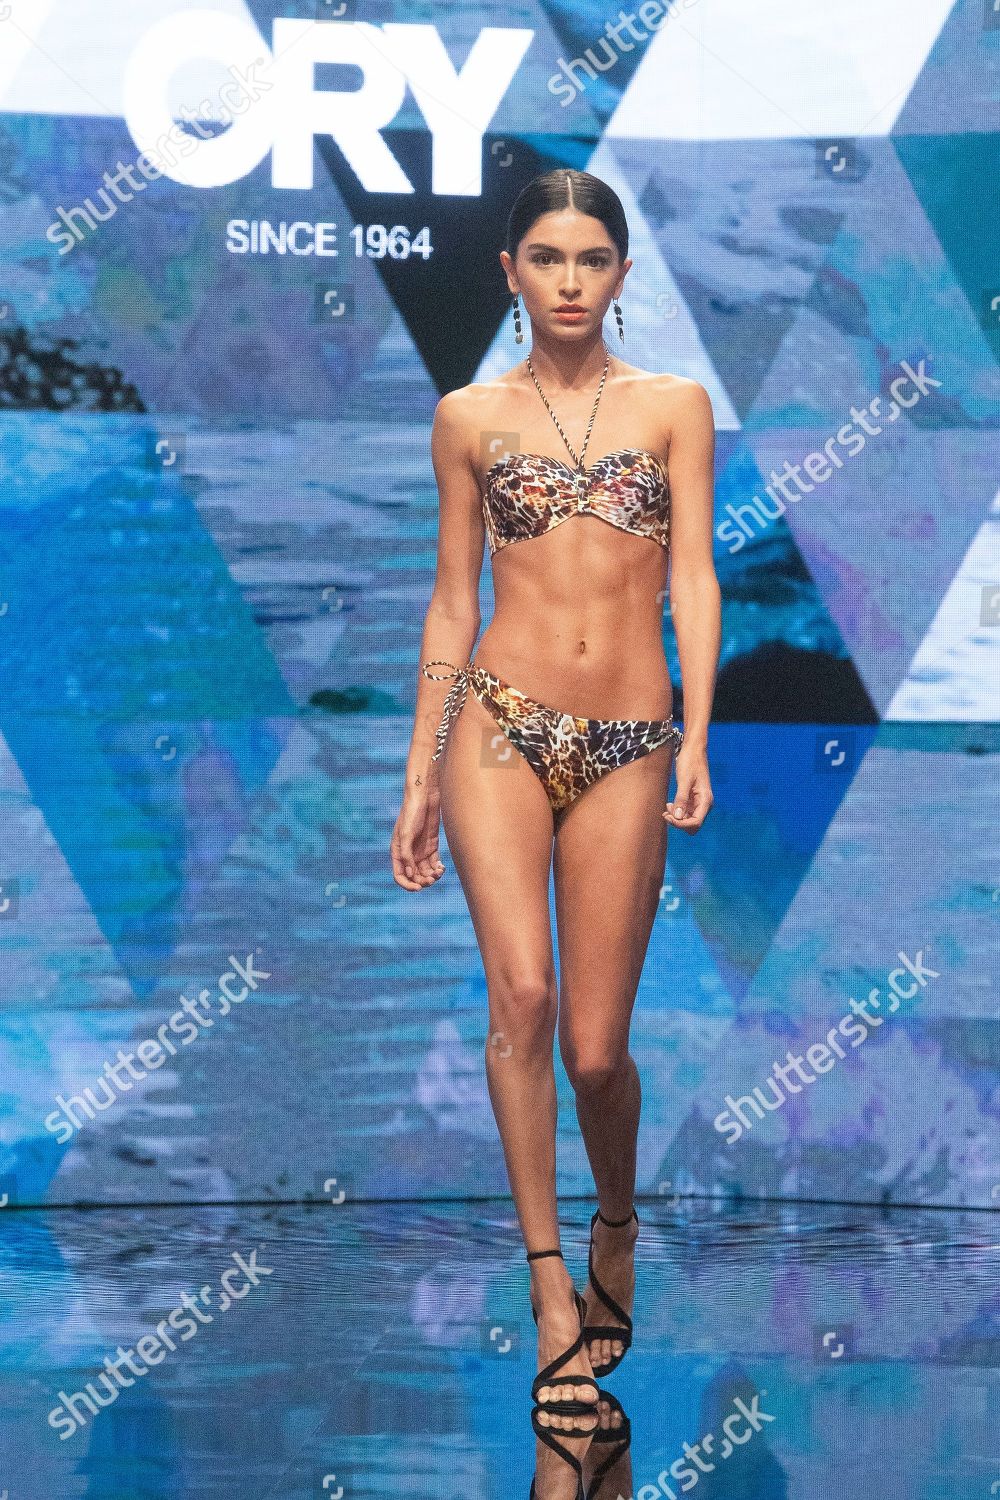 Outside Filthy stand Lucia Rivera On Catwalk Editorial Stock Photo - Stock Image | Shutterstock  | Shutterstock Editorial